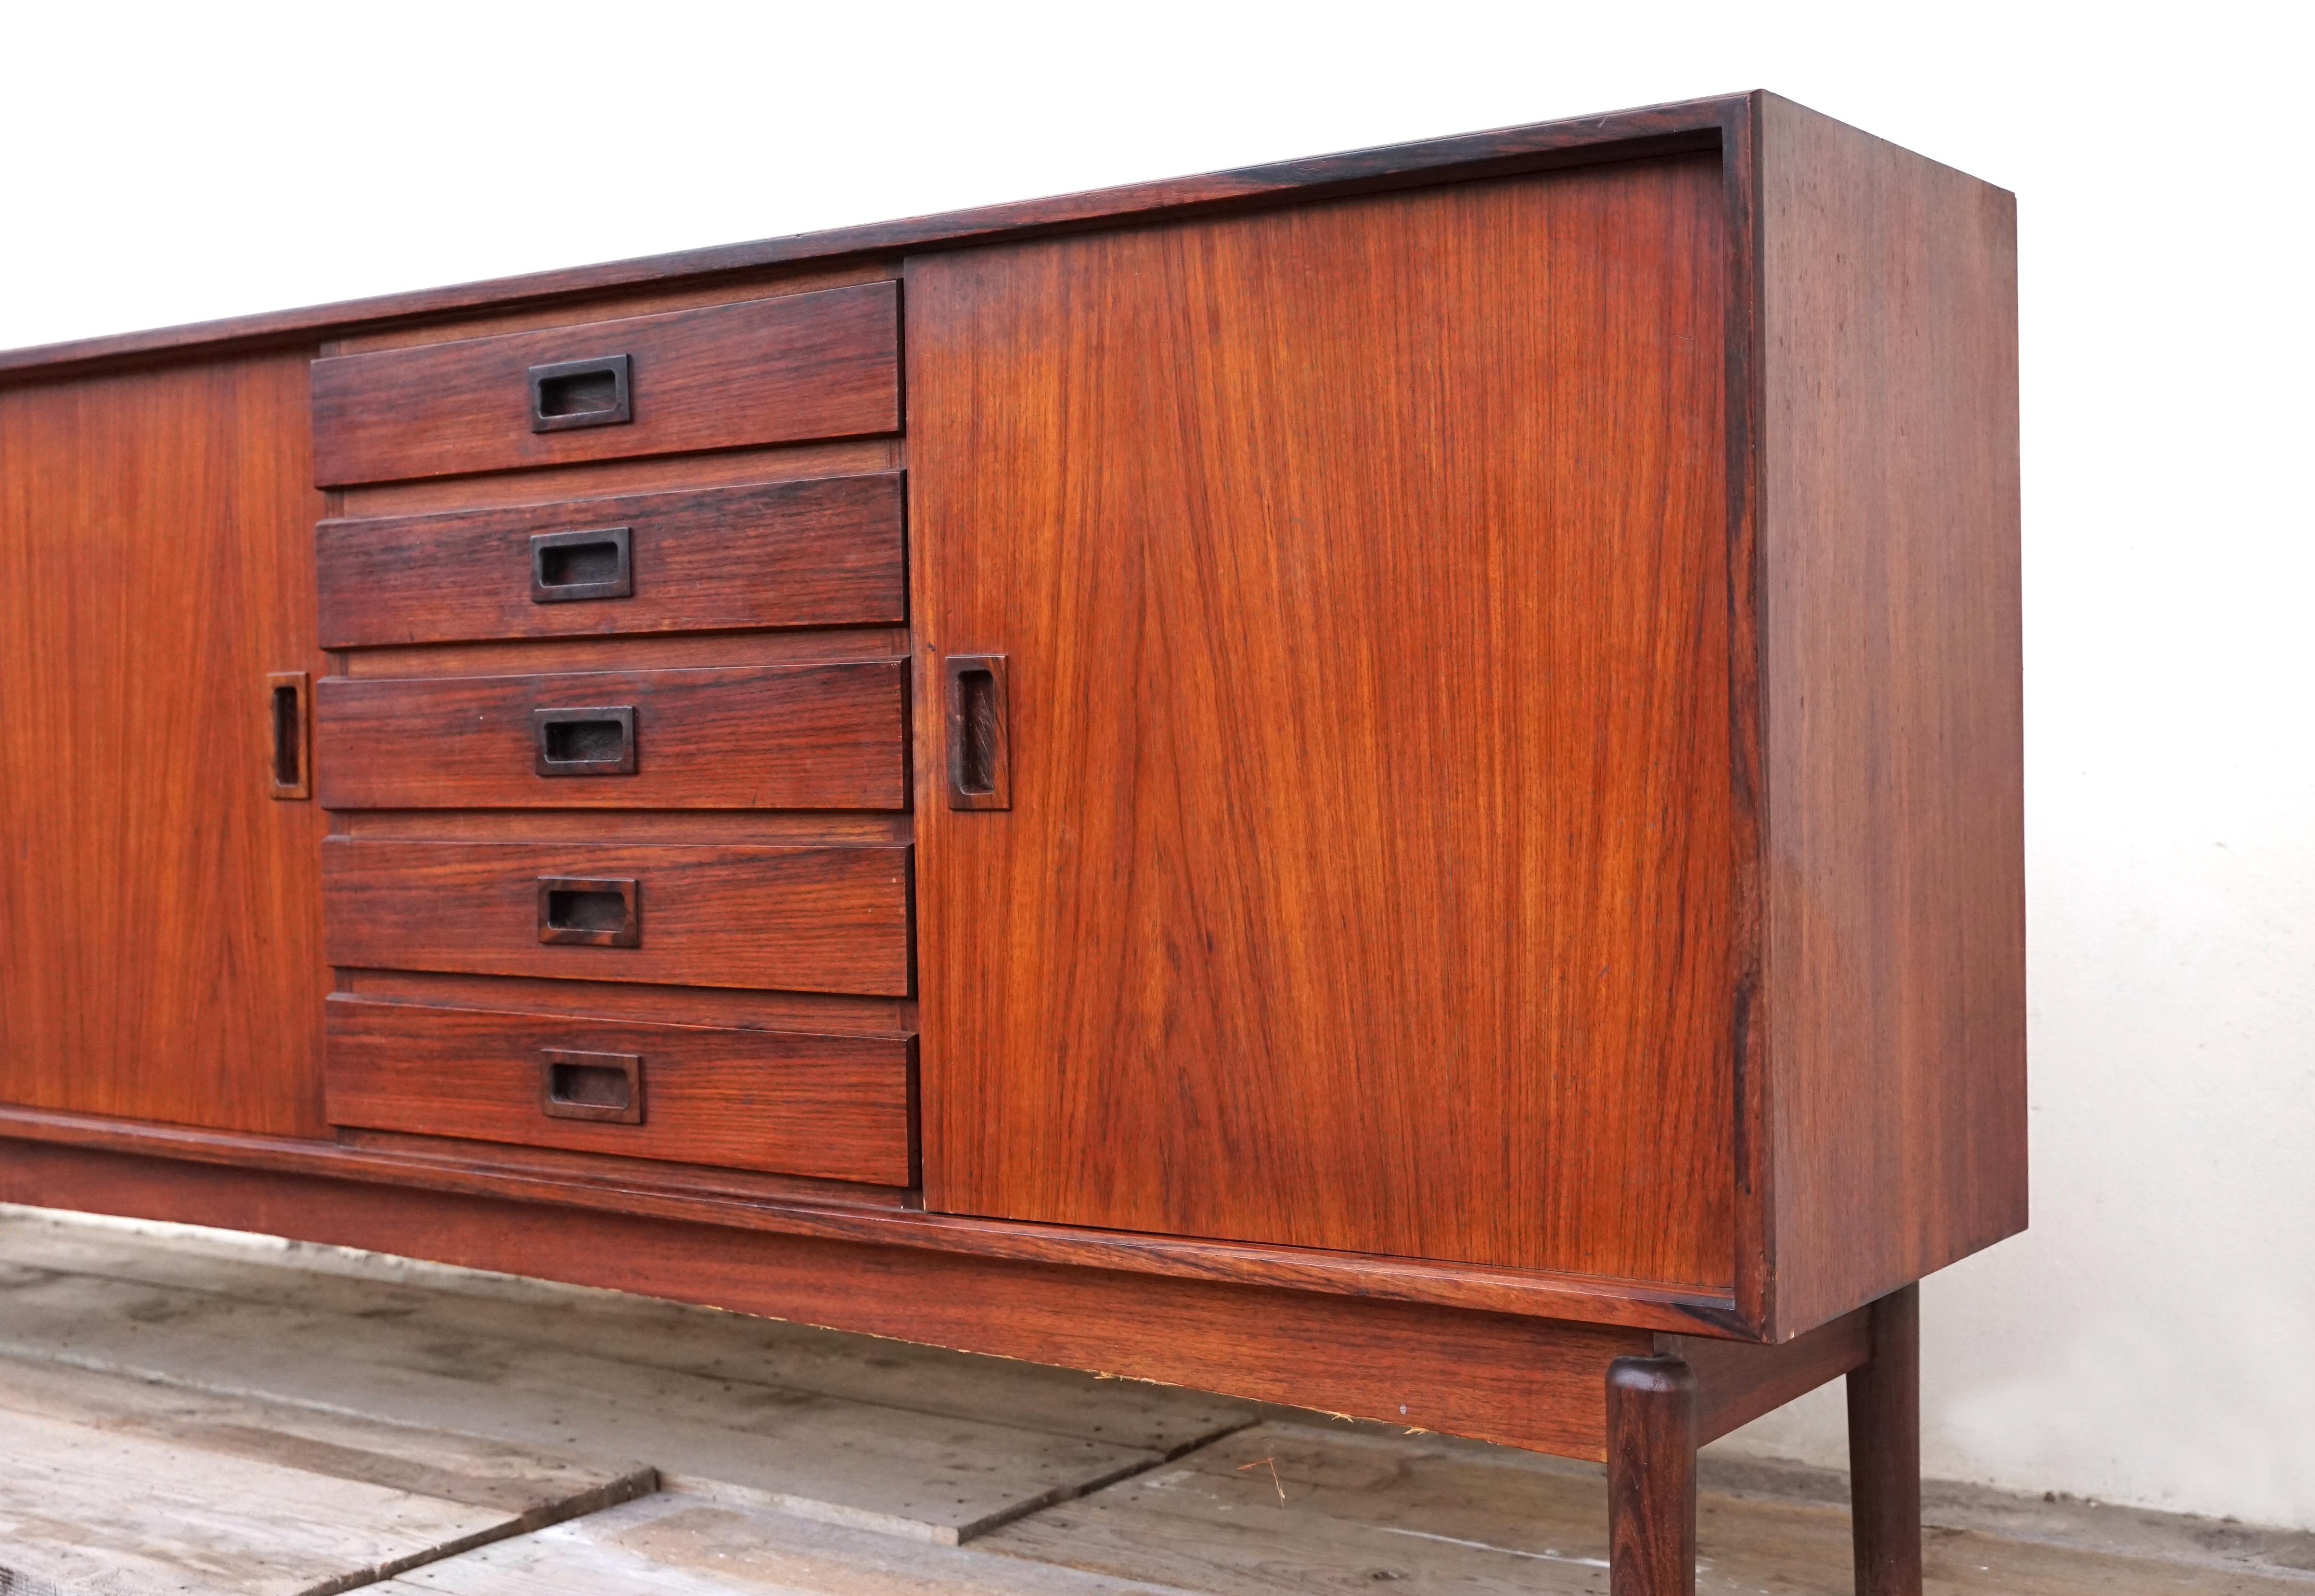 Our beautiful sideboard made of rosewood is ideal for use as a storage unit. It has two sliding doors, a chest of drawers with 5 drawers and a door that can be opened. Its vintage style and simple, sober lines will add a unique design touch to your